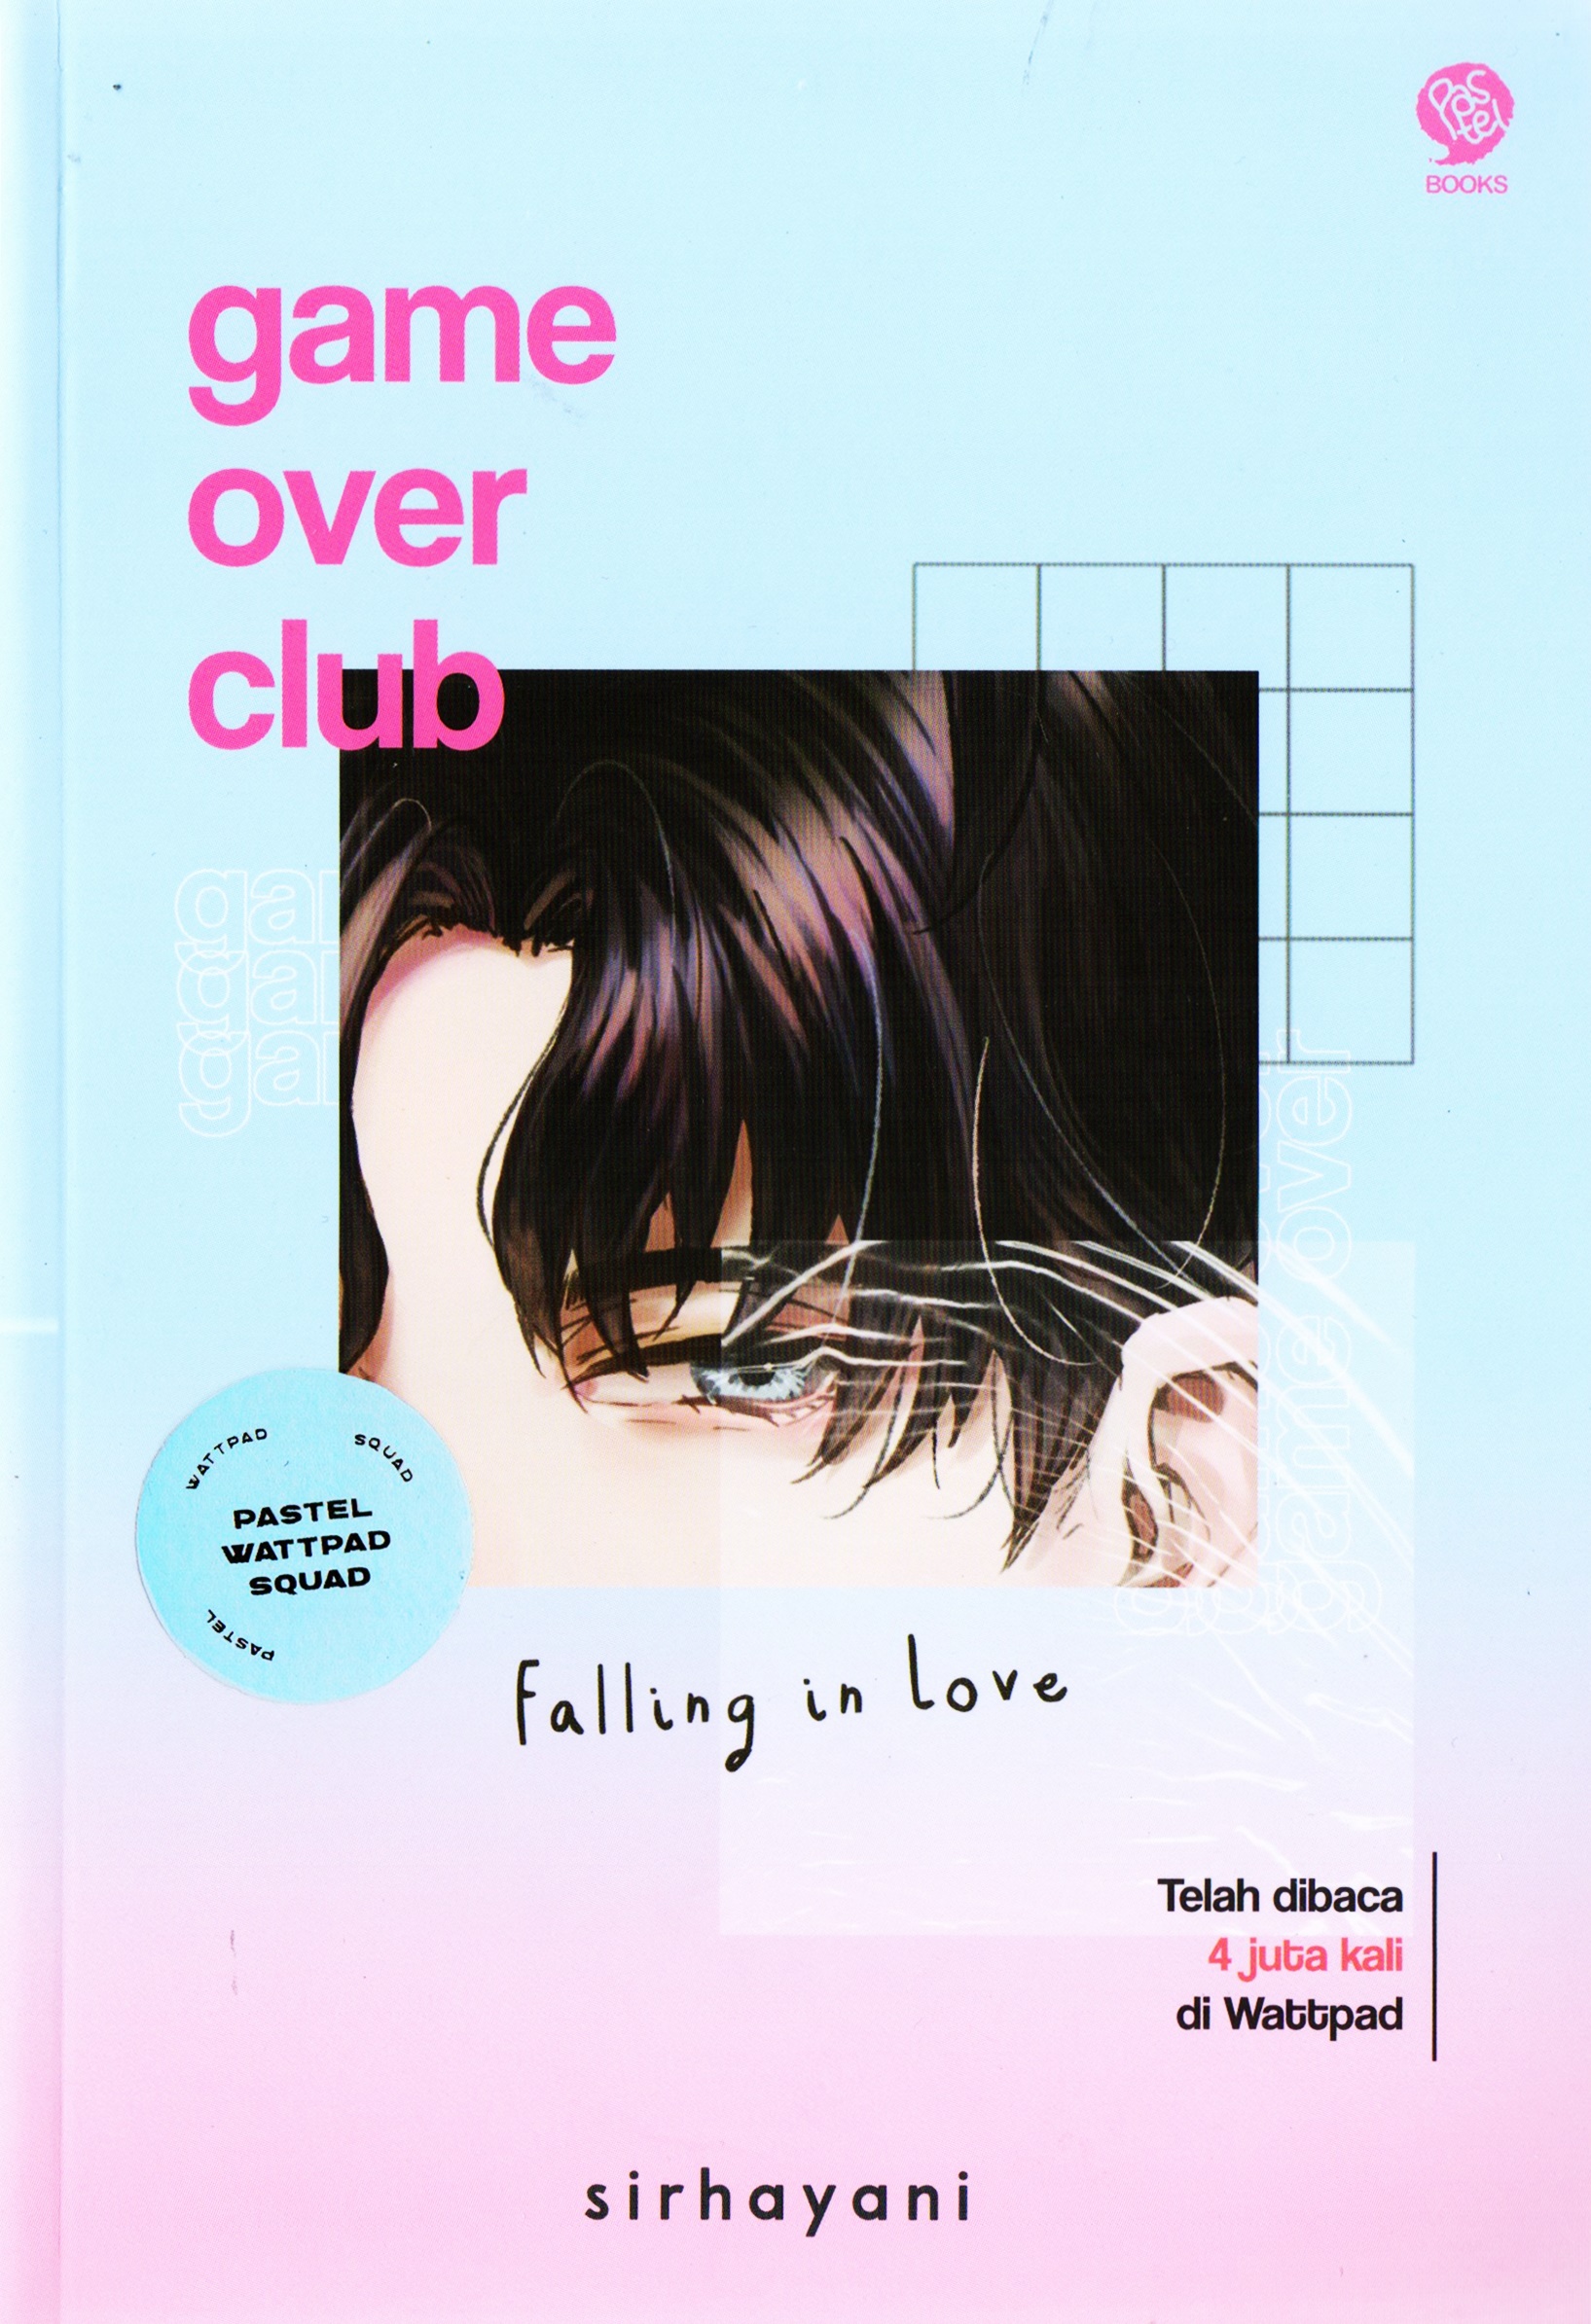 Game over club falling in love